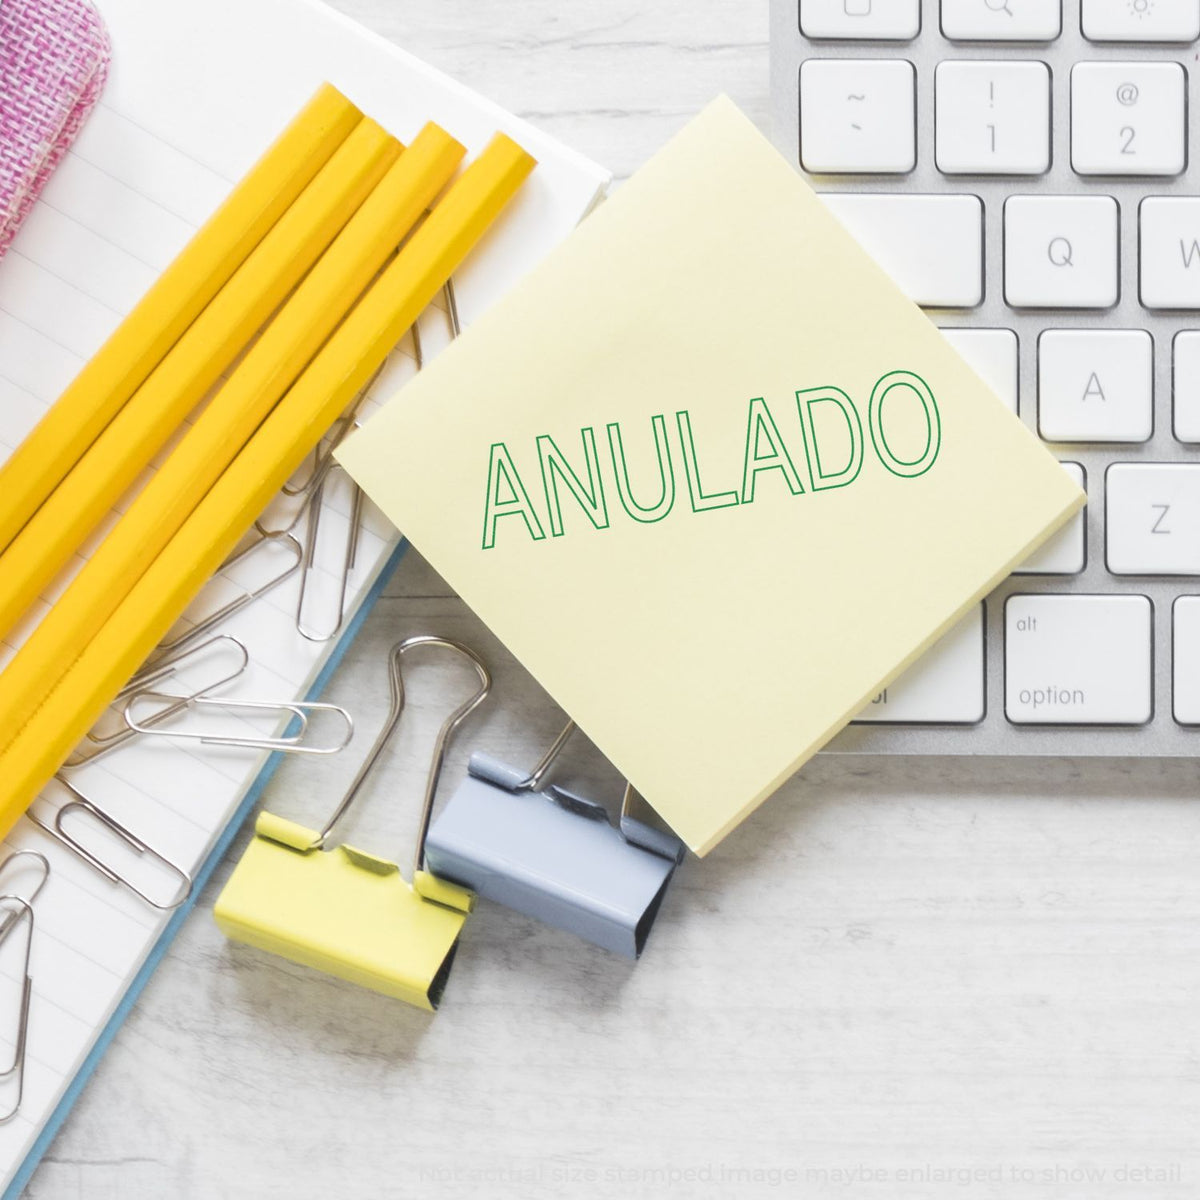 In Use Self-Inking Outline Anulado Stamp Image